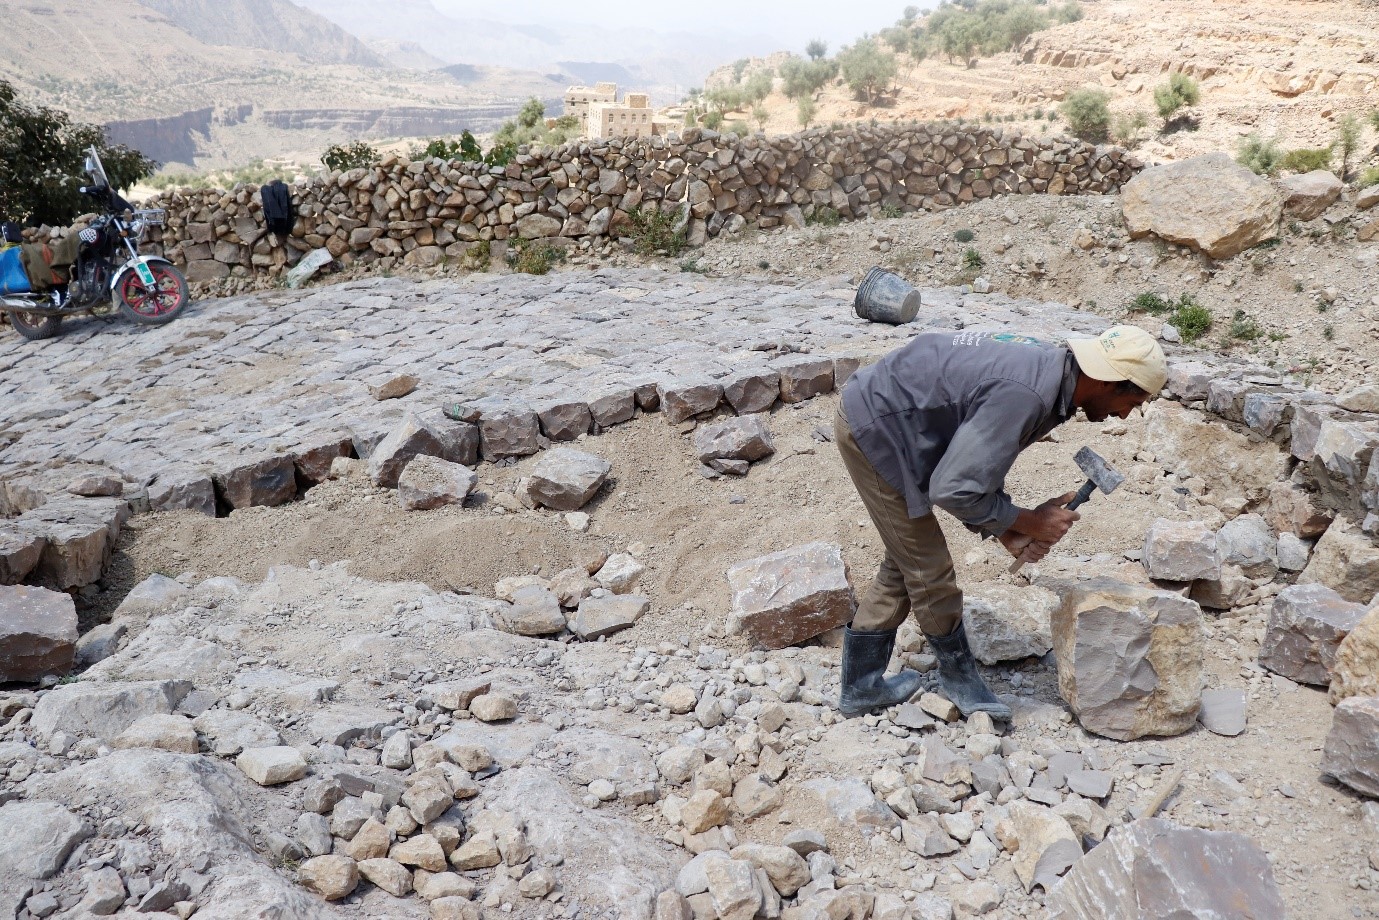 A man with a hammer working in a rocky area